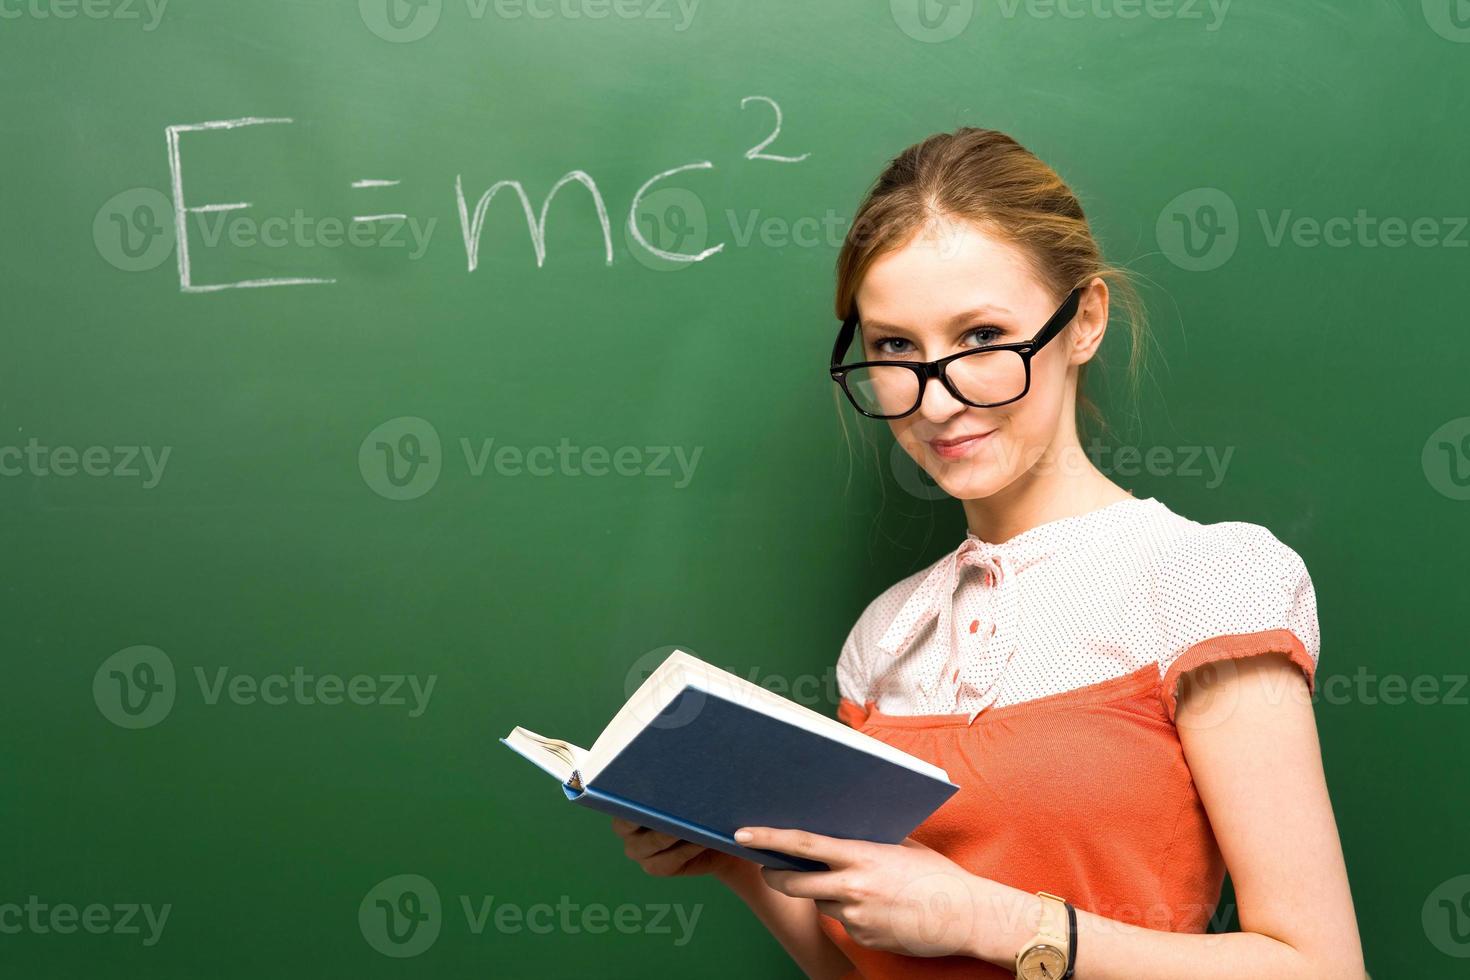 Student standing by chalkboard with e=mc2 photo